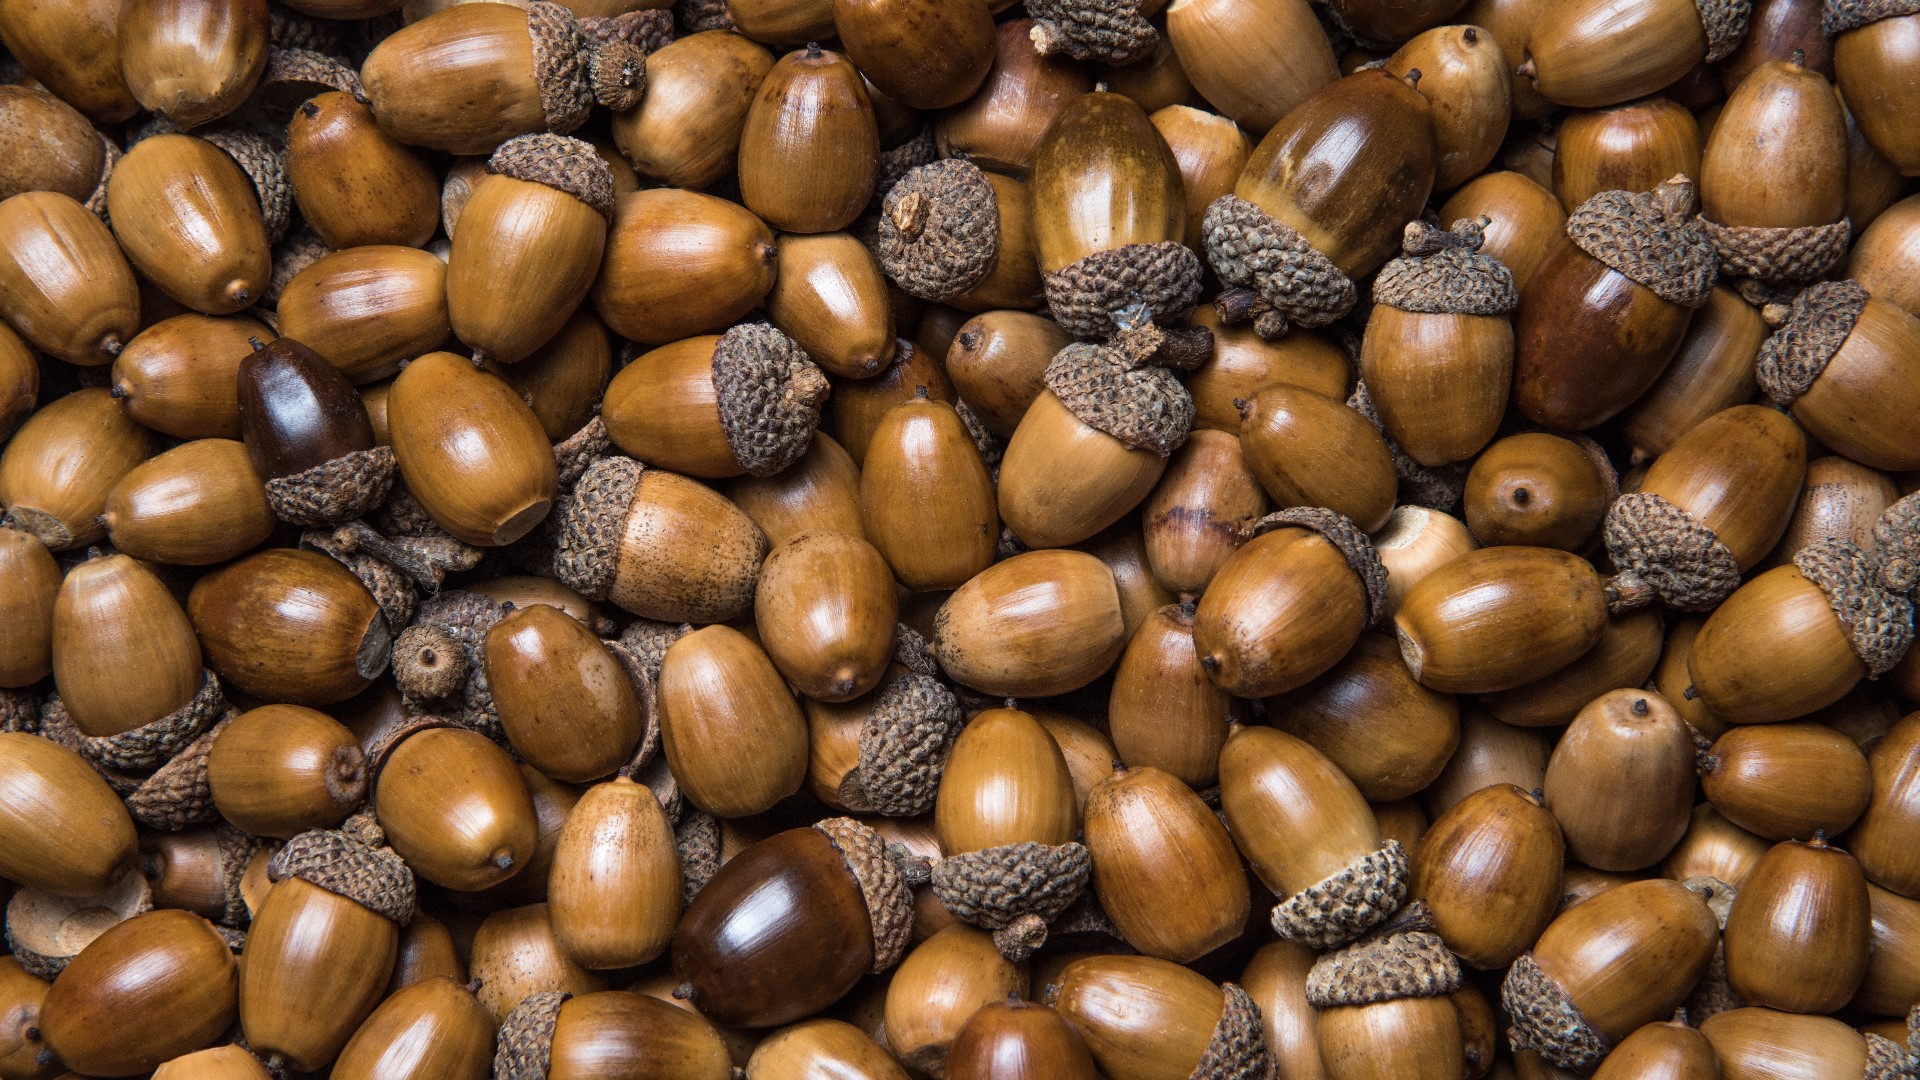 Acorns are being produced in huge quantities this fall. Here's why.